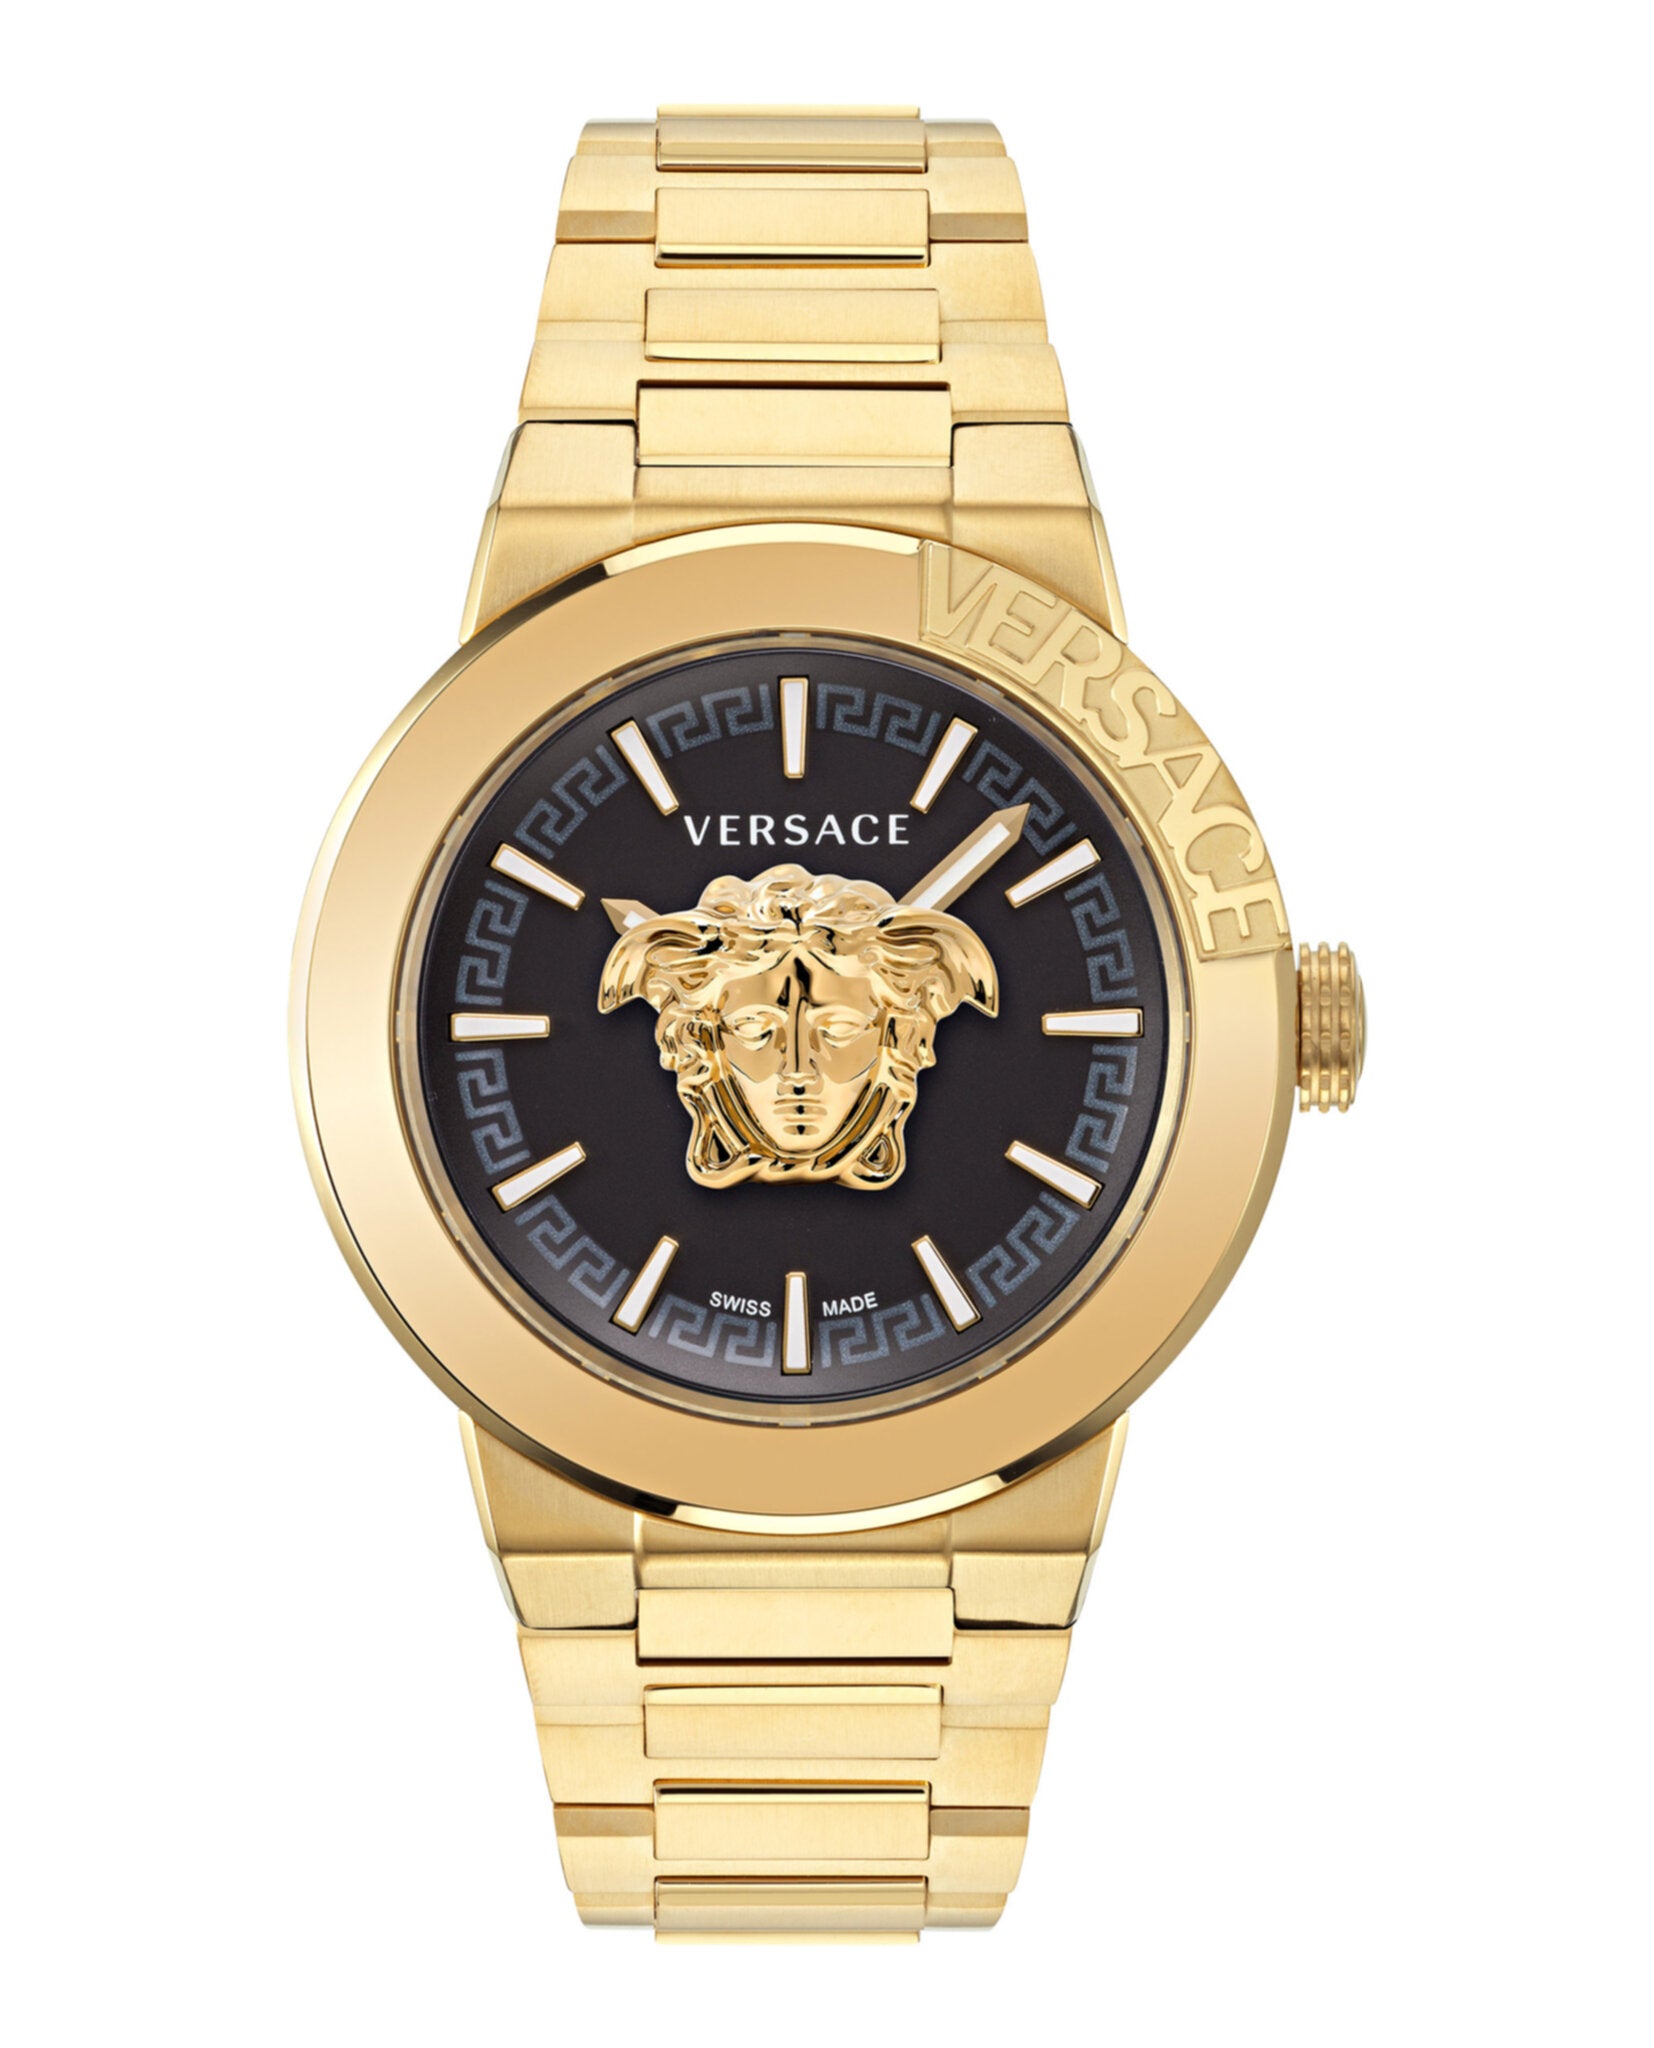 Versace Medusa Coin Watch for Rs.114,587 for sale from a Private Seller on  Chrono24